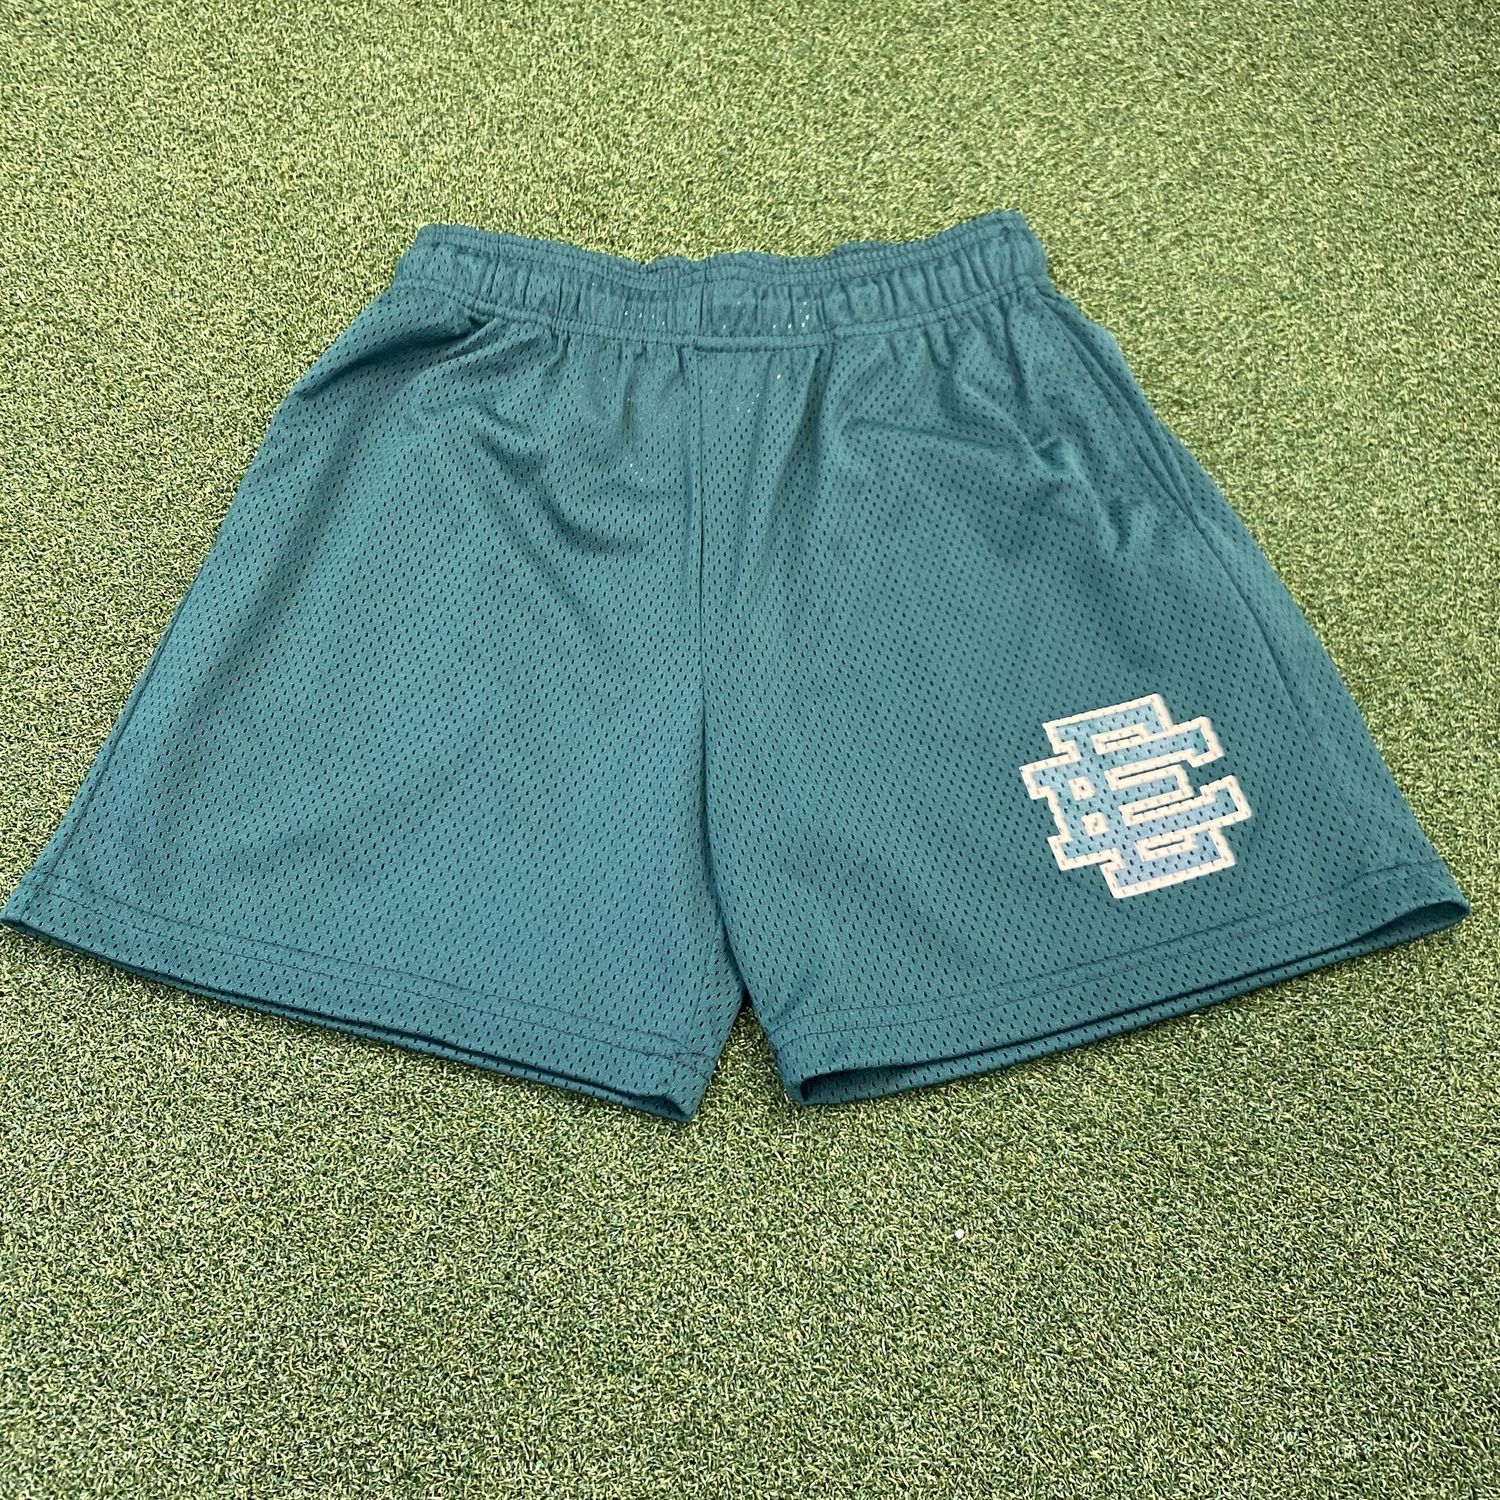 EE Shorts (Forrest Green), Size: S